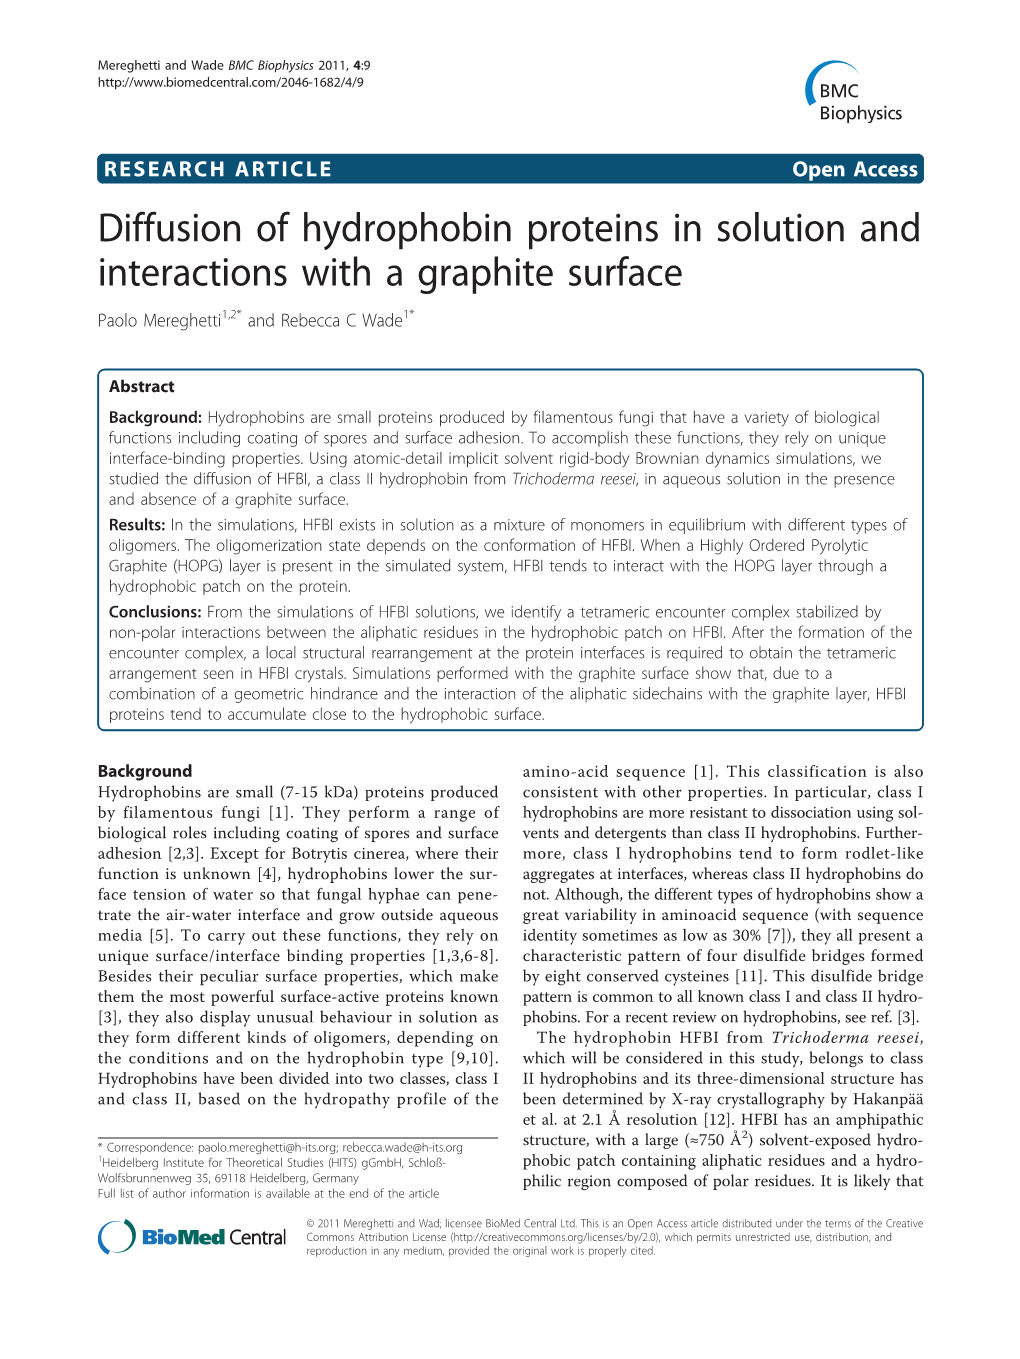 Diffusion of Hydrophobin Proteins in Solution and Interactions with a Graphite Surface Paolo Mereghetti1,2* and Rebecca C Wade1*